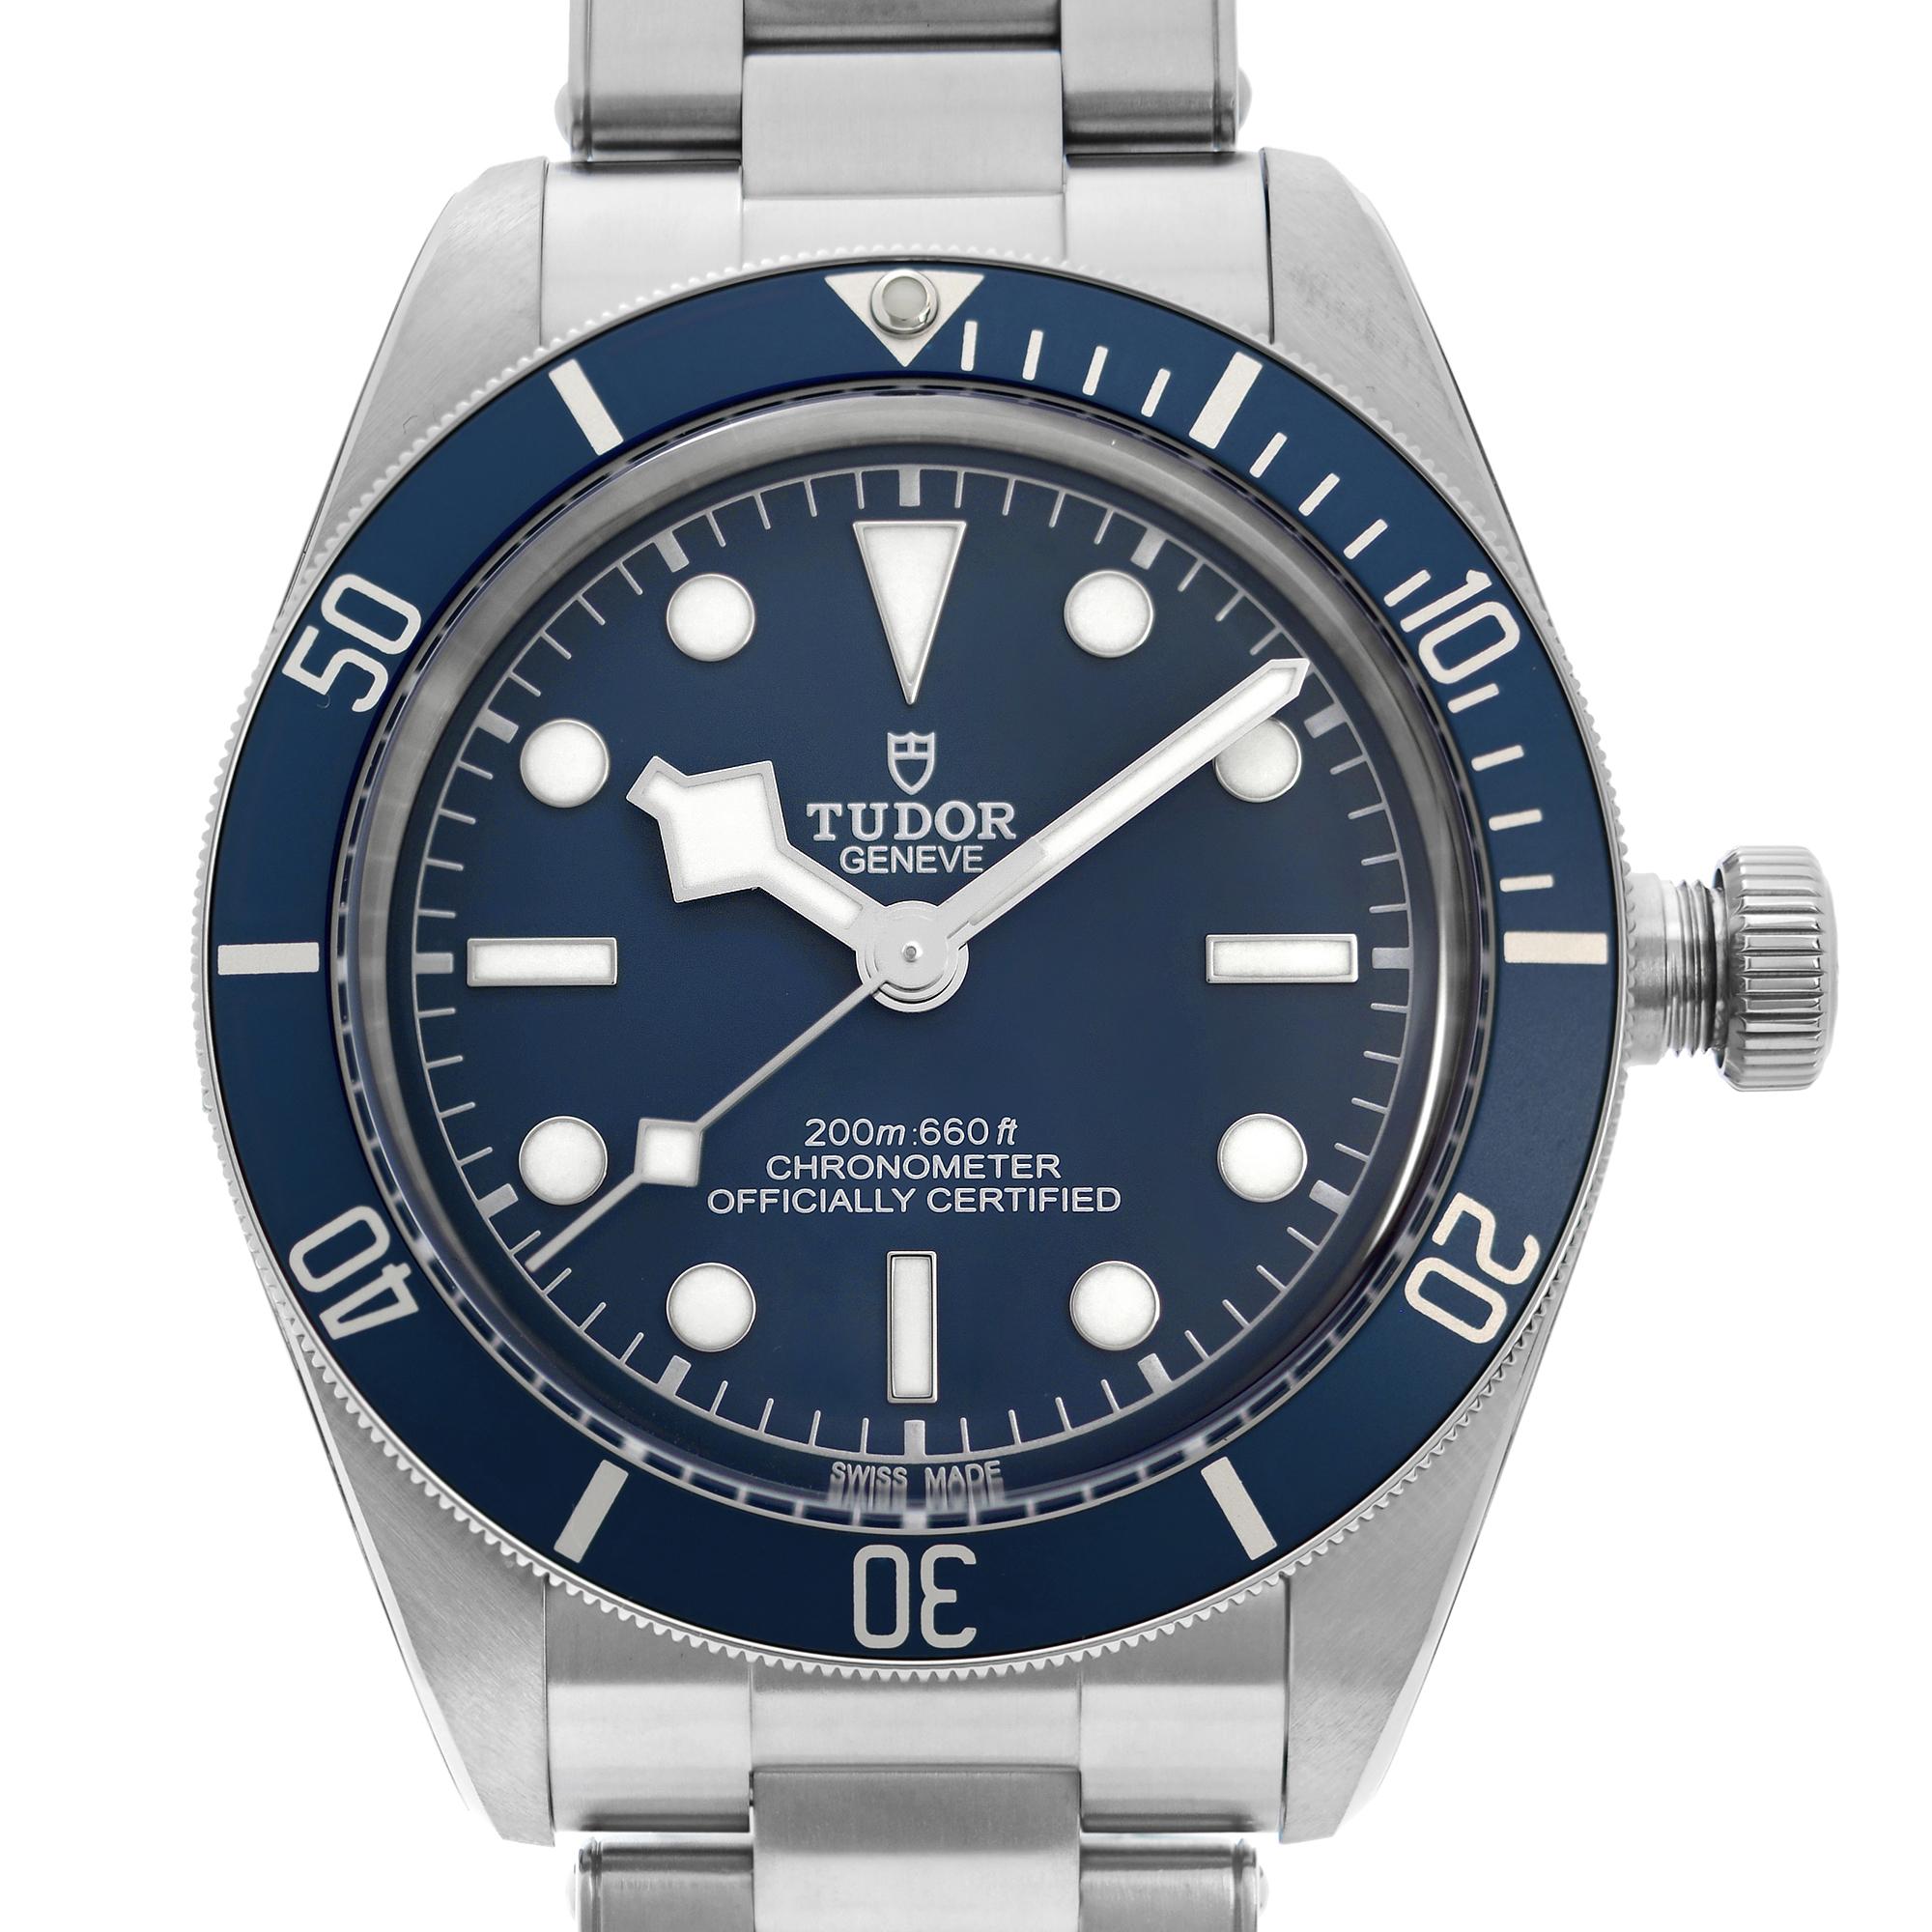 Unworn 2021 card.  Tudor Black Bay 58 Stainless Steel Blue Dial Automatic Men's Watch. This Beautiful Timepiece Features: Stainless Steel Case and Bracelet, Uni-Directional Rotating Stainless Steel Bezel with a Blue Aluminum Ring, Blue Dial with